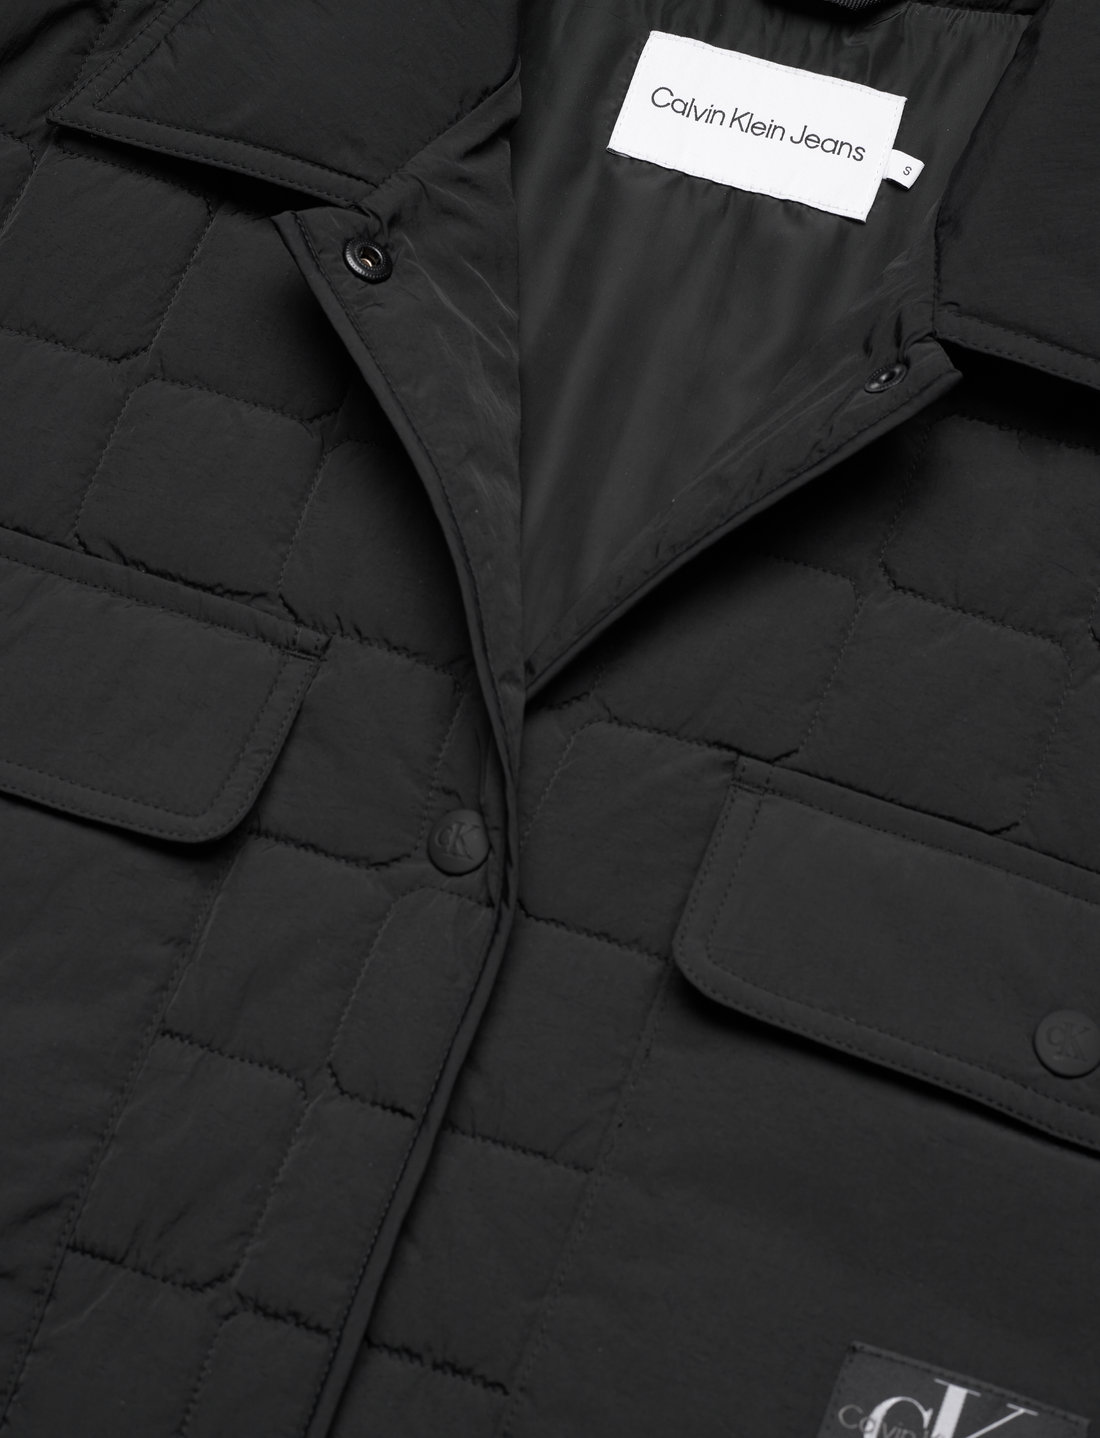 Calvin Klein Jeans Long Quilted Utility Coat - 124.95 €. Buy Quilted jackets  from Calvin Klein Jeans online at Boozt.com. Fast delivery and easy returns